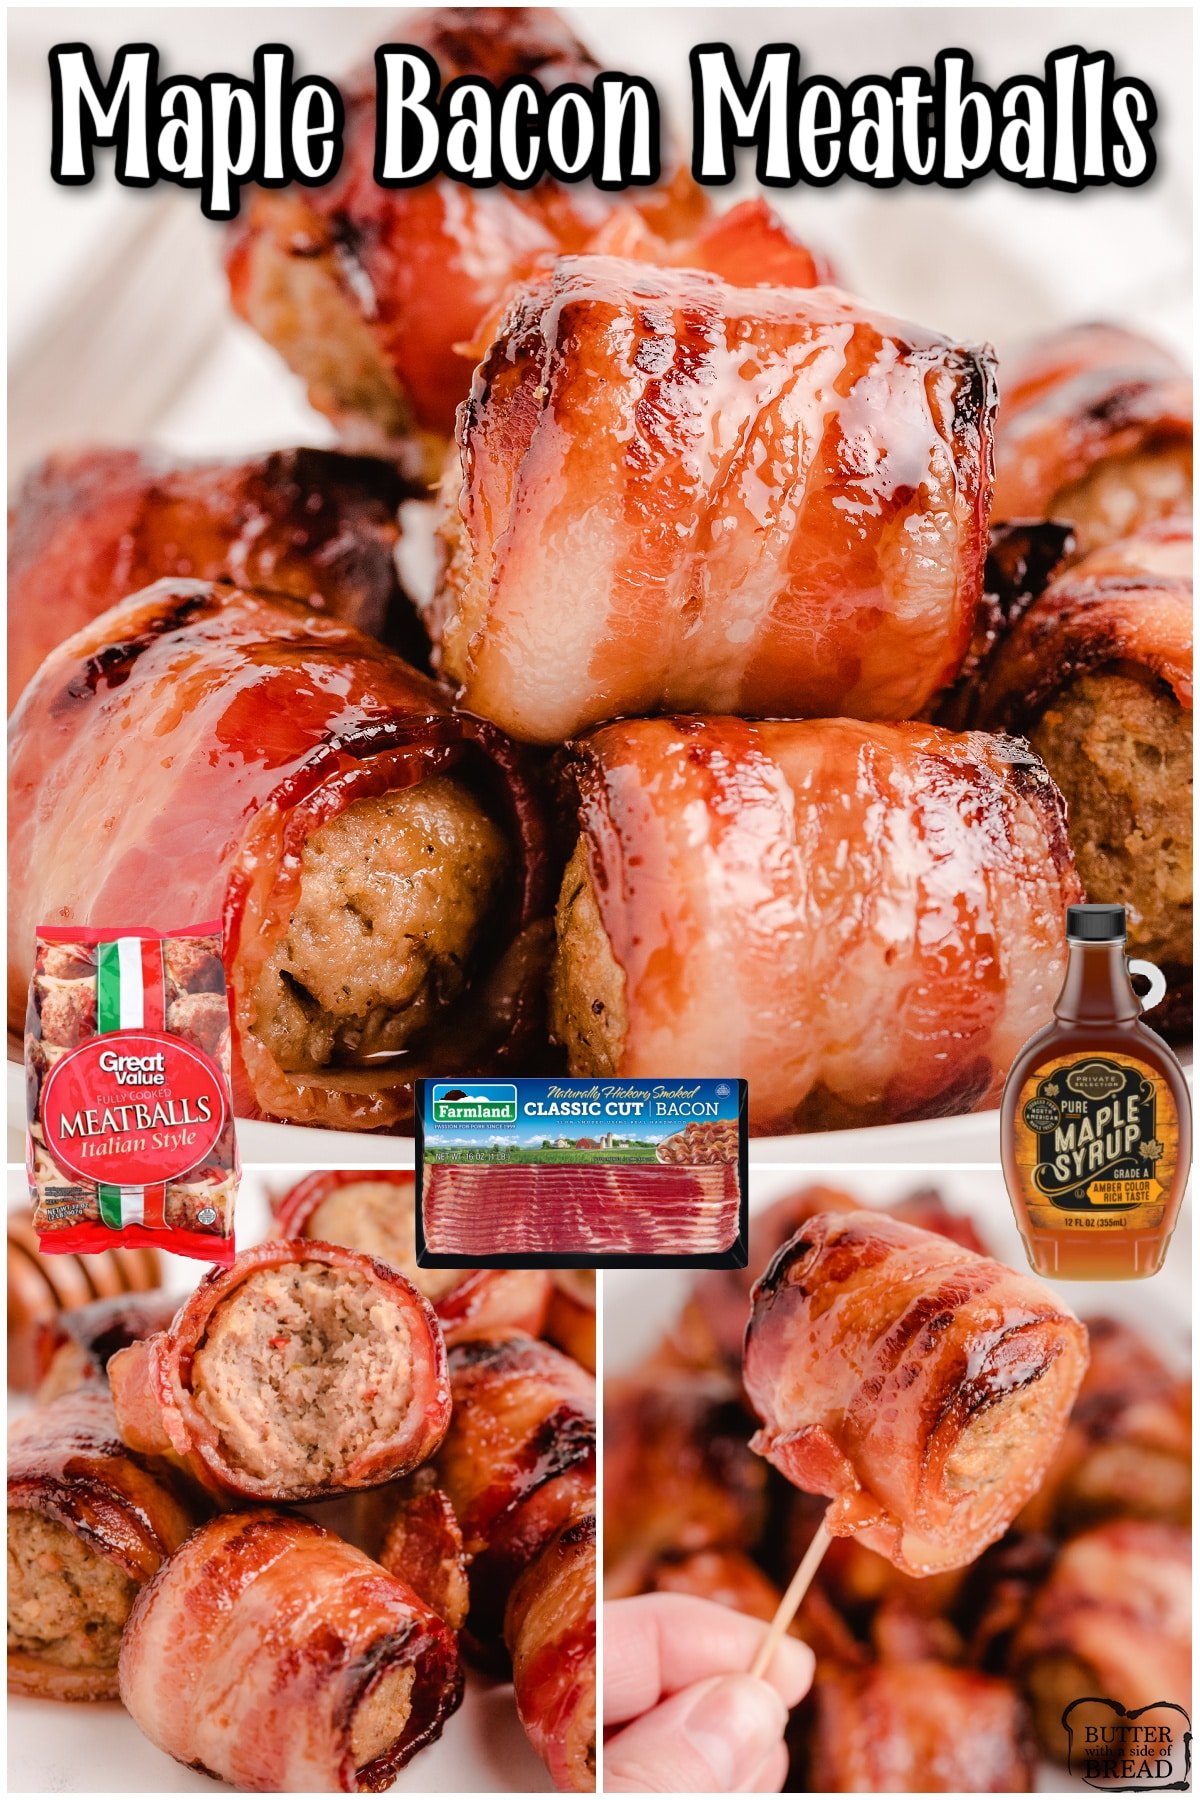 Bacon Wrapped Meatballs made with just 3 ingredients & fantastic savory sweet flavors! These toothpick appetizer meatballs are perfect for parties, tailgating or anytime you want to eat BACON!